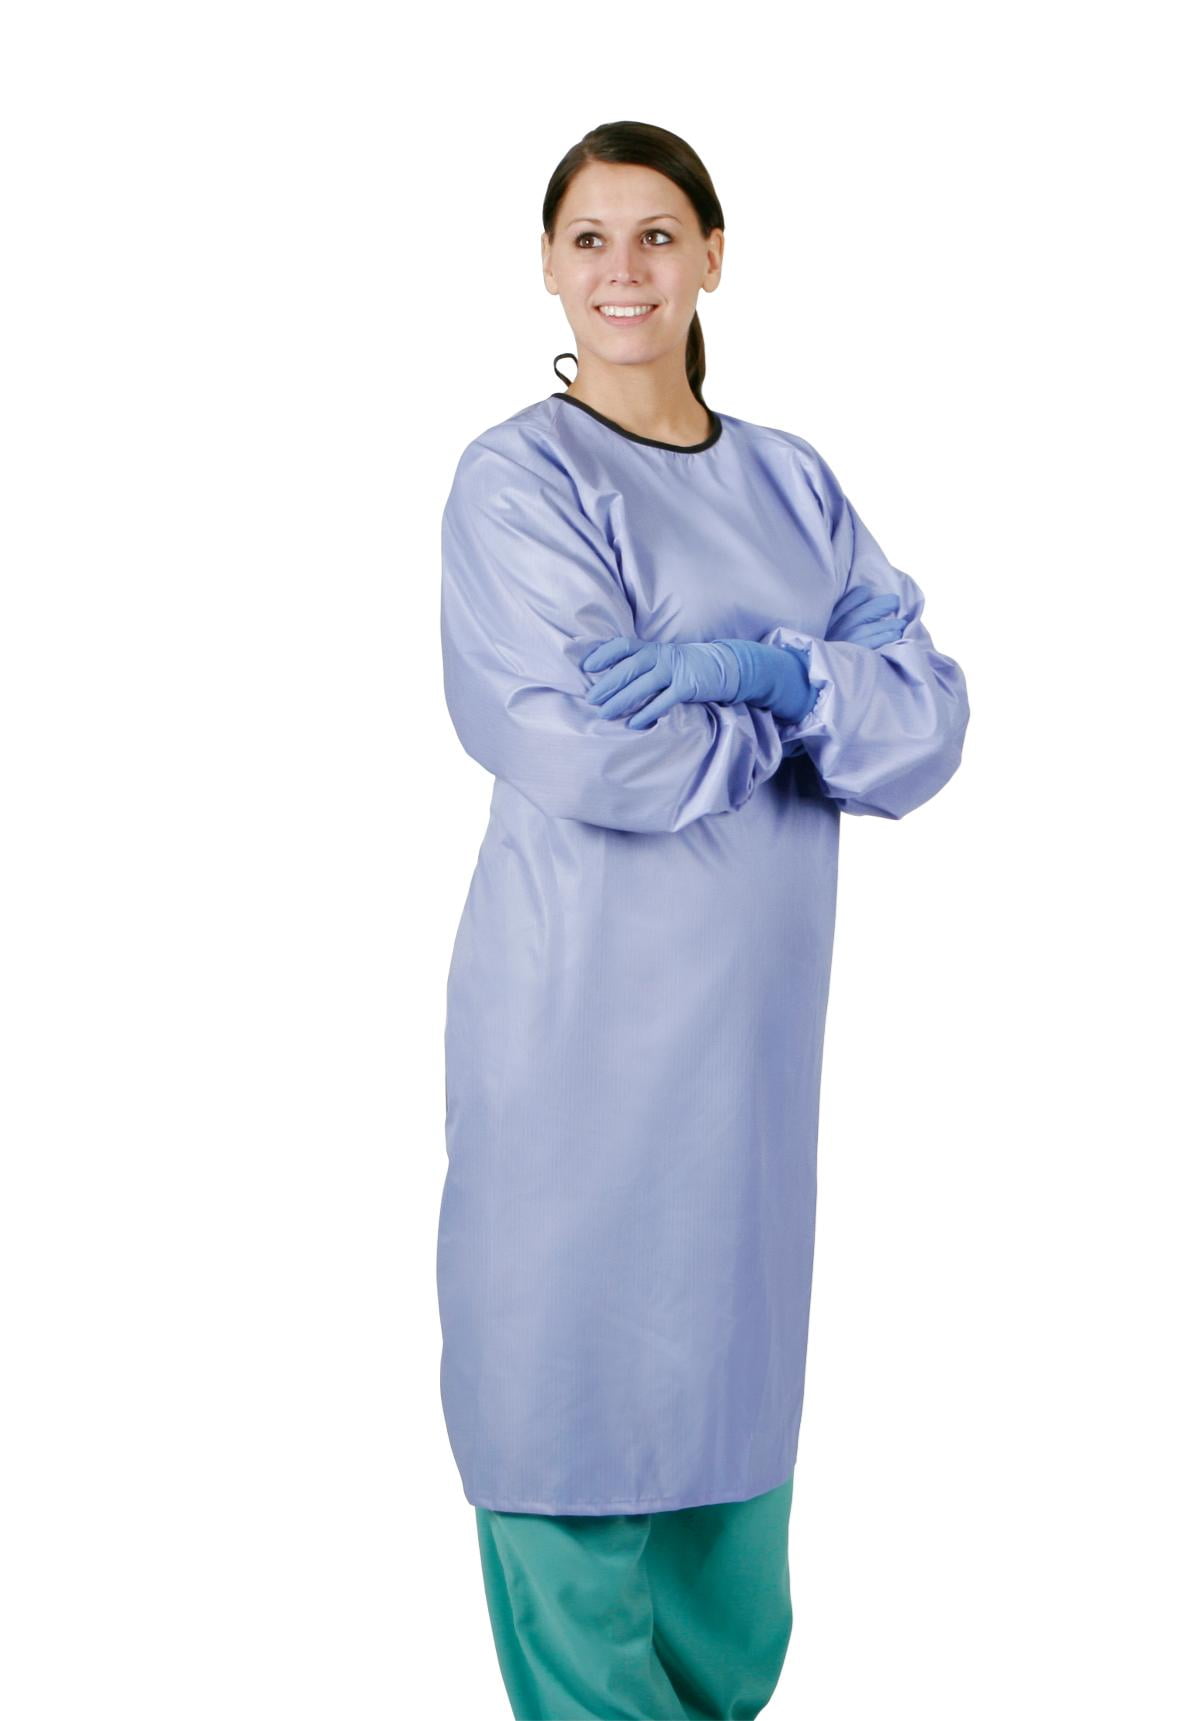 Where to Buy Hospital Gowns in Singapore | MF Asia Singapore